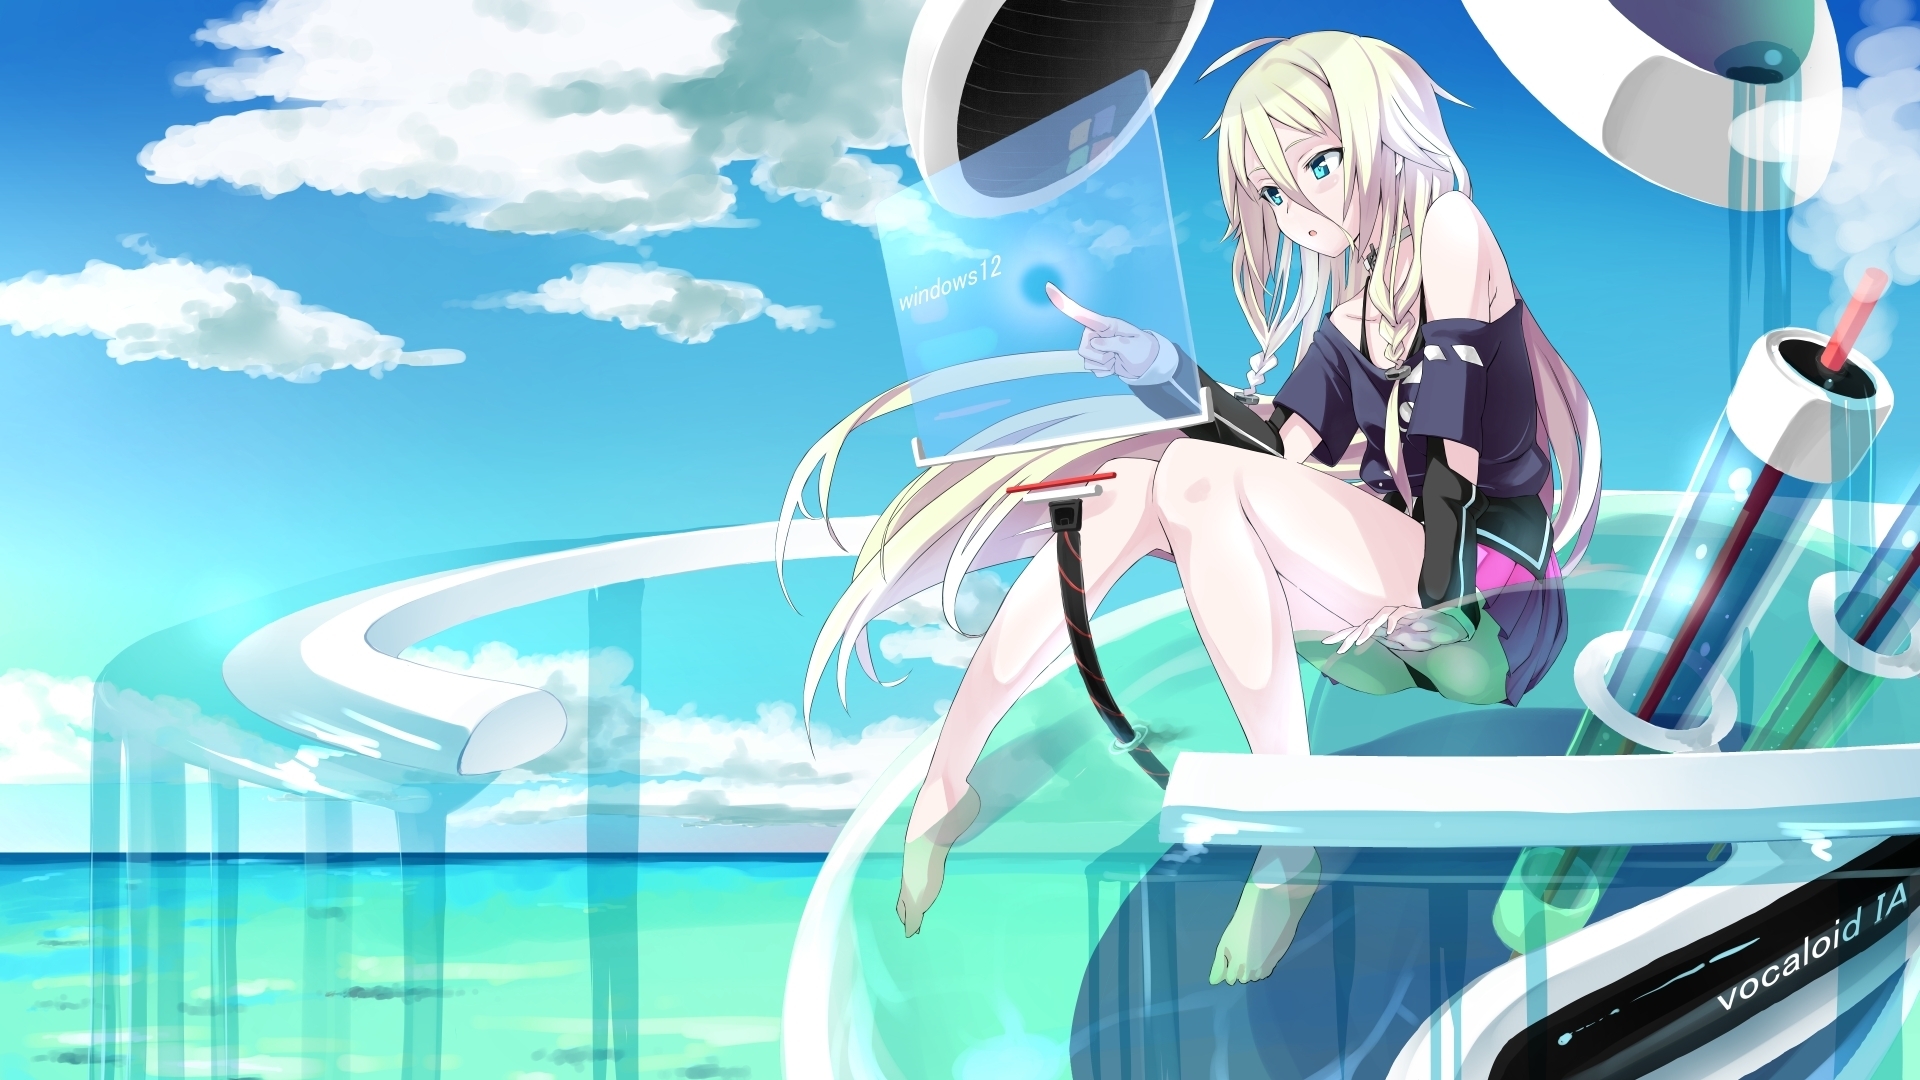 Ia Vocaloid A Girl The Interface Water Sea Abstract Clouds